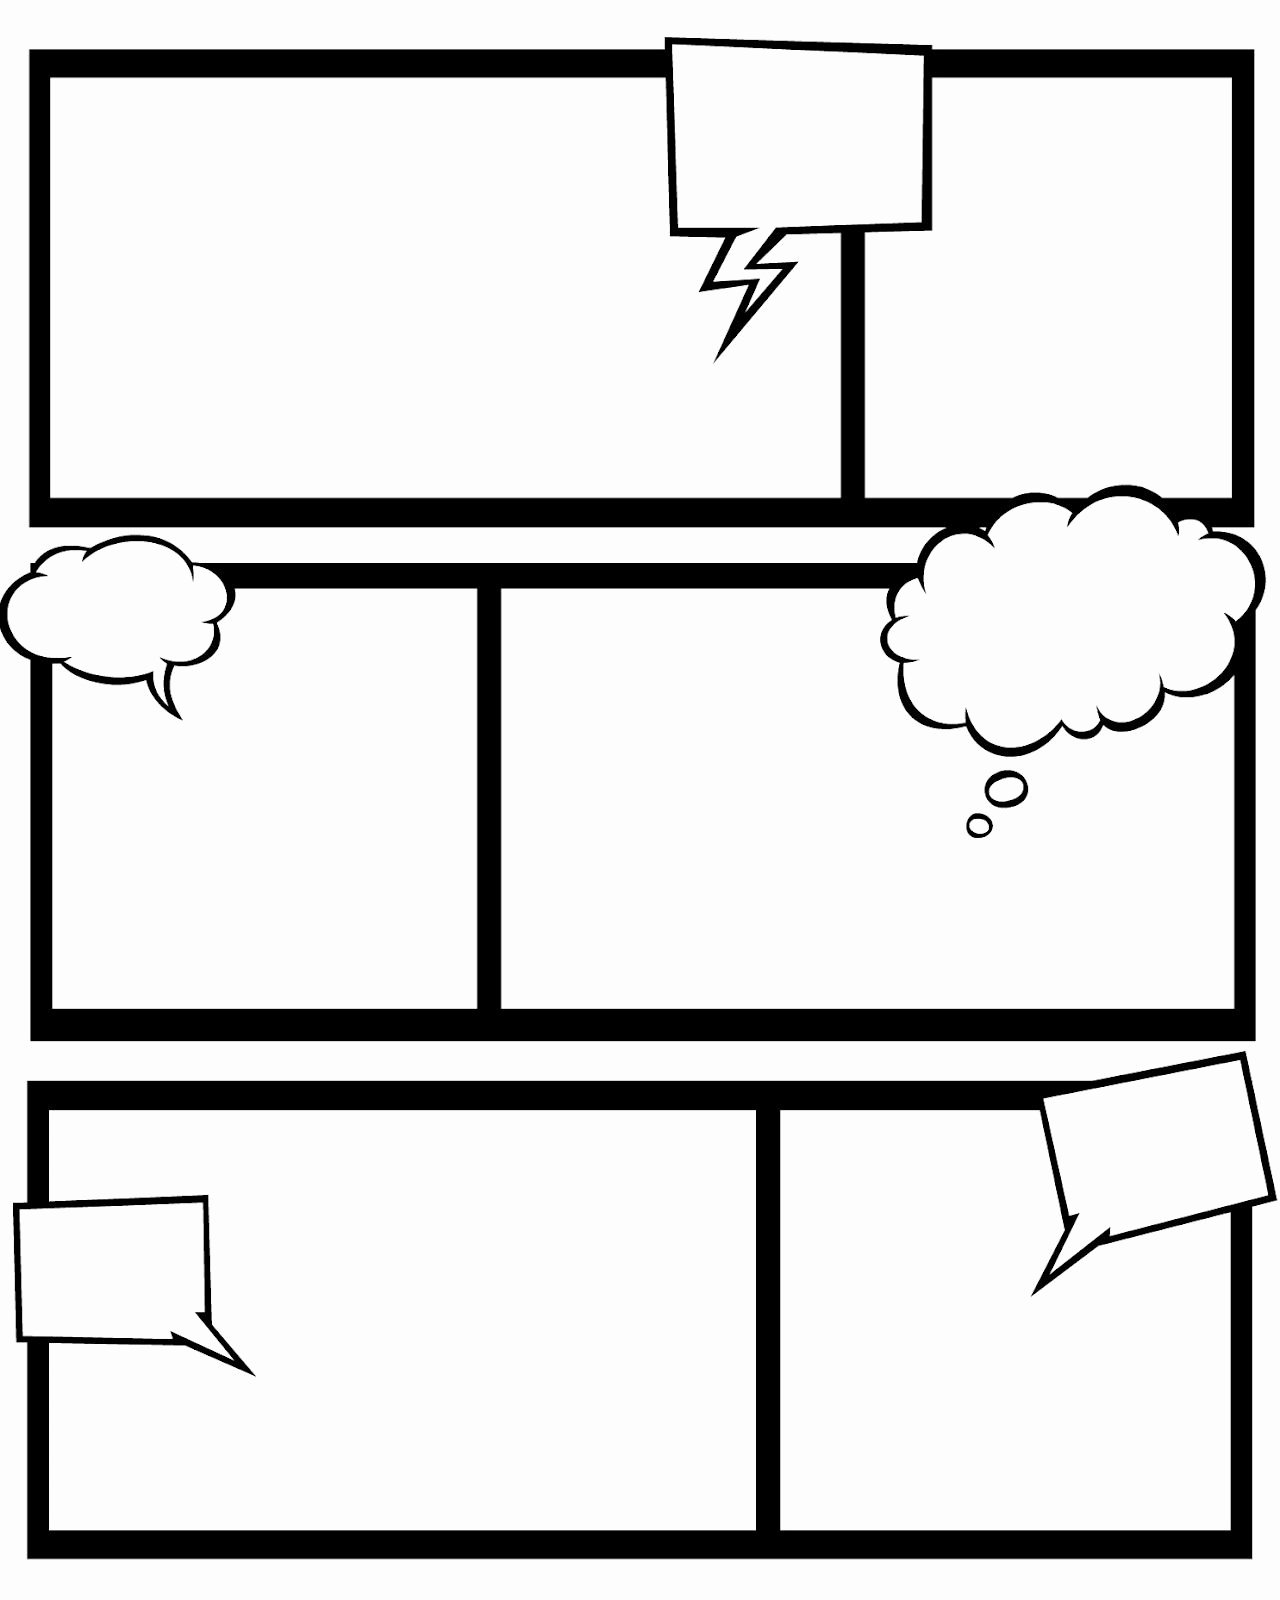 Comic Strip Template Awesome Ic Strip Blank Template Love to Learn